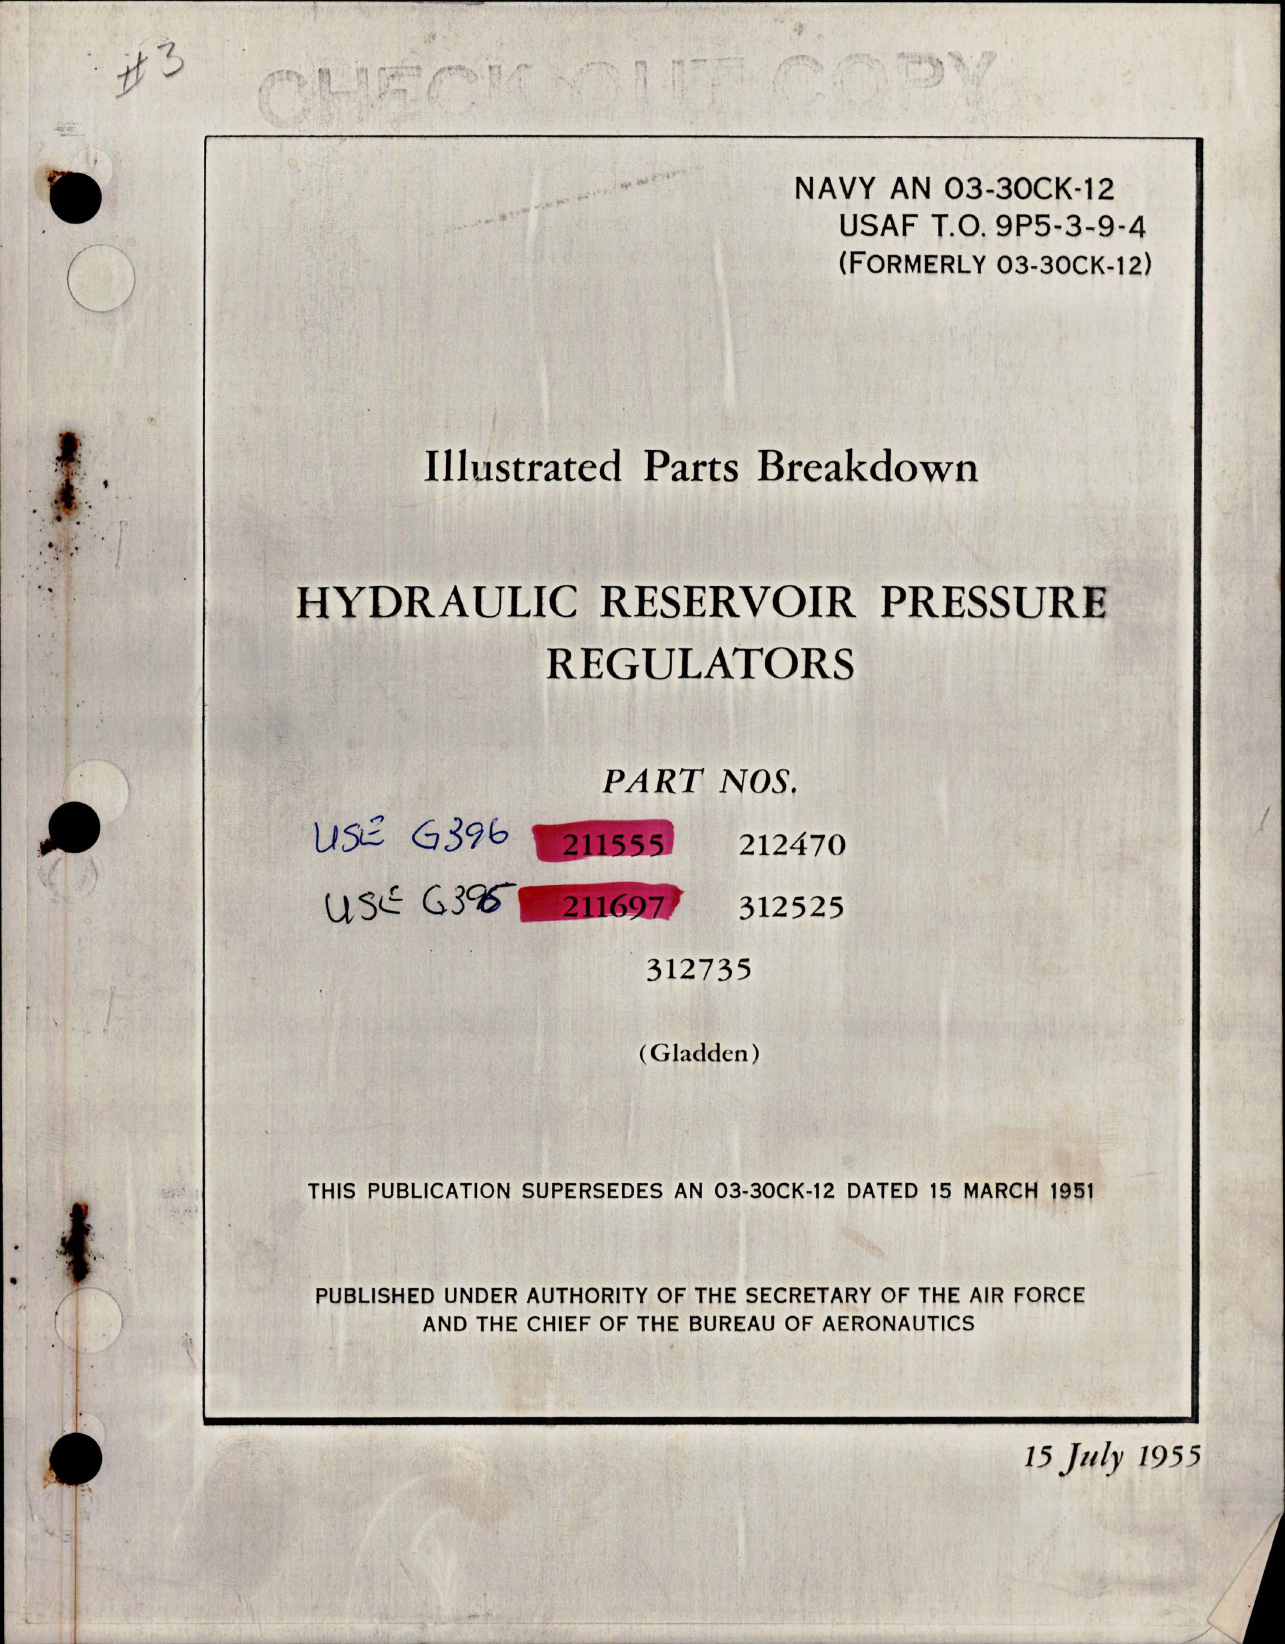 Sample page 1 from AirCorps Library document: Illustrated Parts Breakdown for Hydraulic Reservoir Pressure Regulators - Parts 211555, 211697, 212470, 312525, 312735 